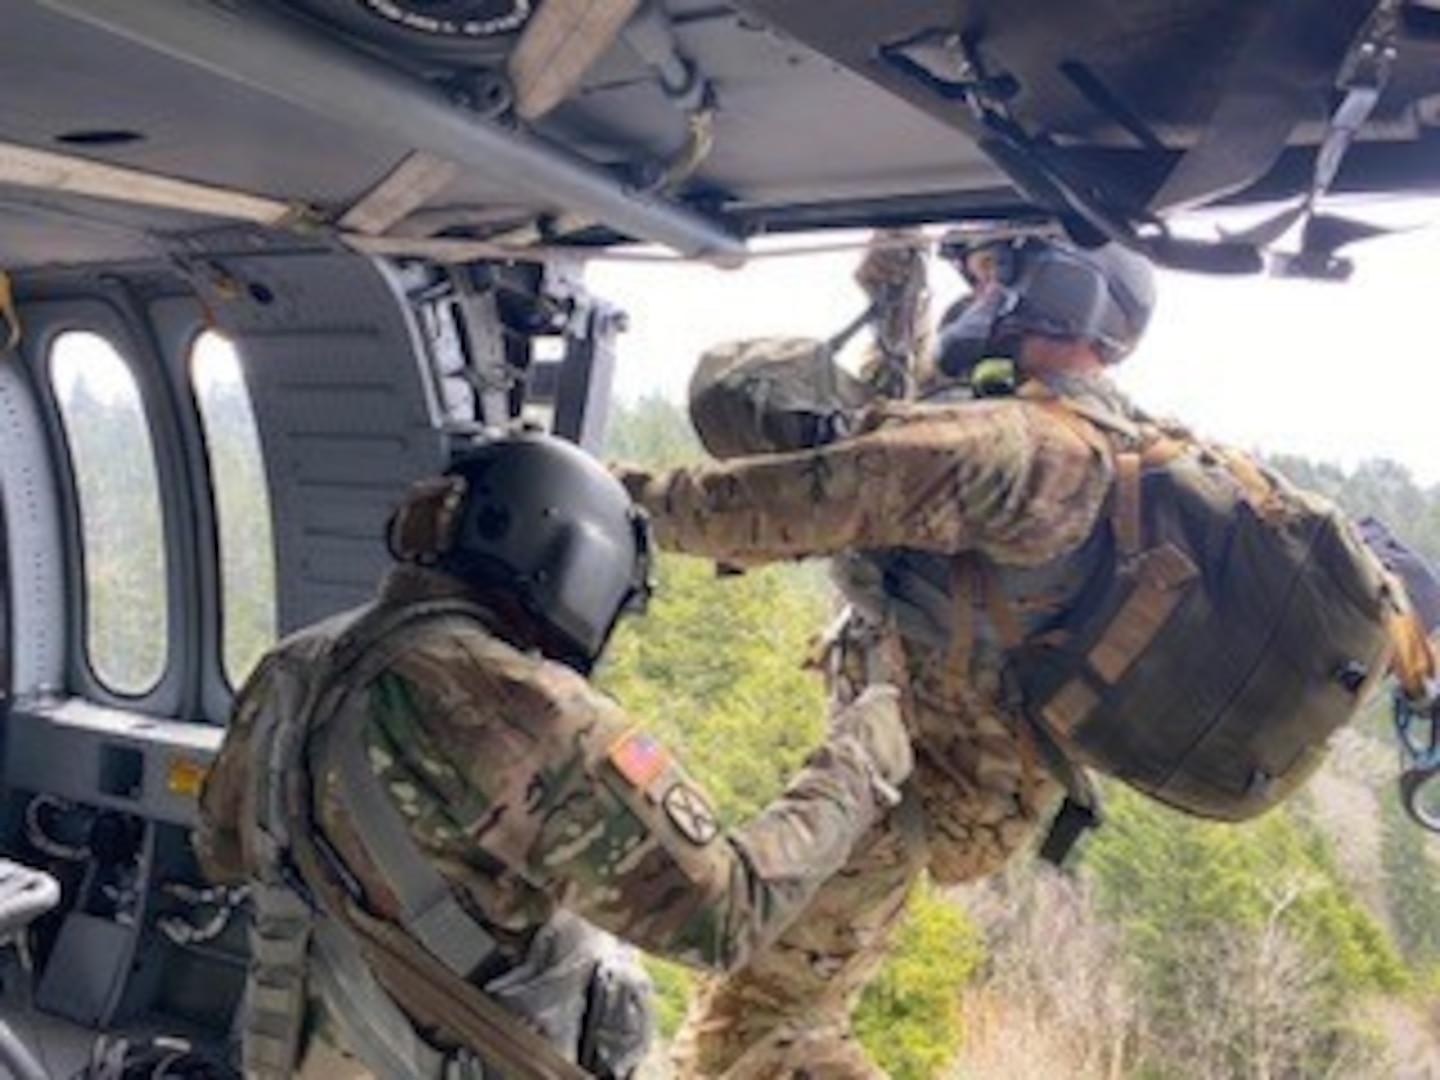 Tennessee National Guard Sgt. 1st Class Tracy Banta begins hoist operations, descending from a Black Hawk helicopter to a stroke victim who was hiking on the Appalachian Trail in Great Smoky Mountains National Park April 15, 2021. The patient was flown to a hospital in Knoxville.